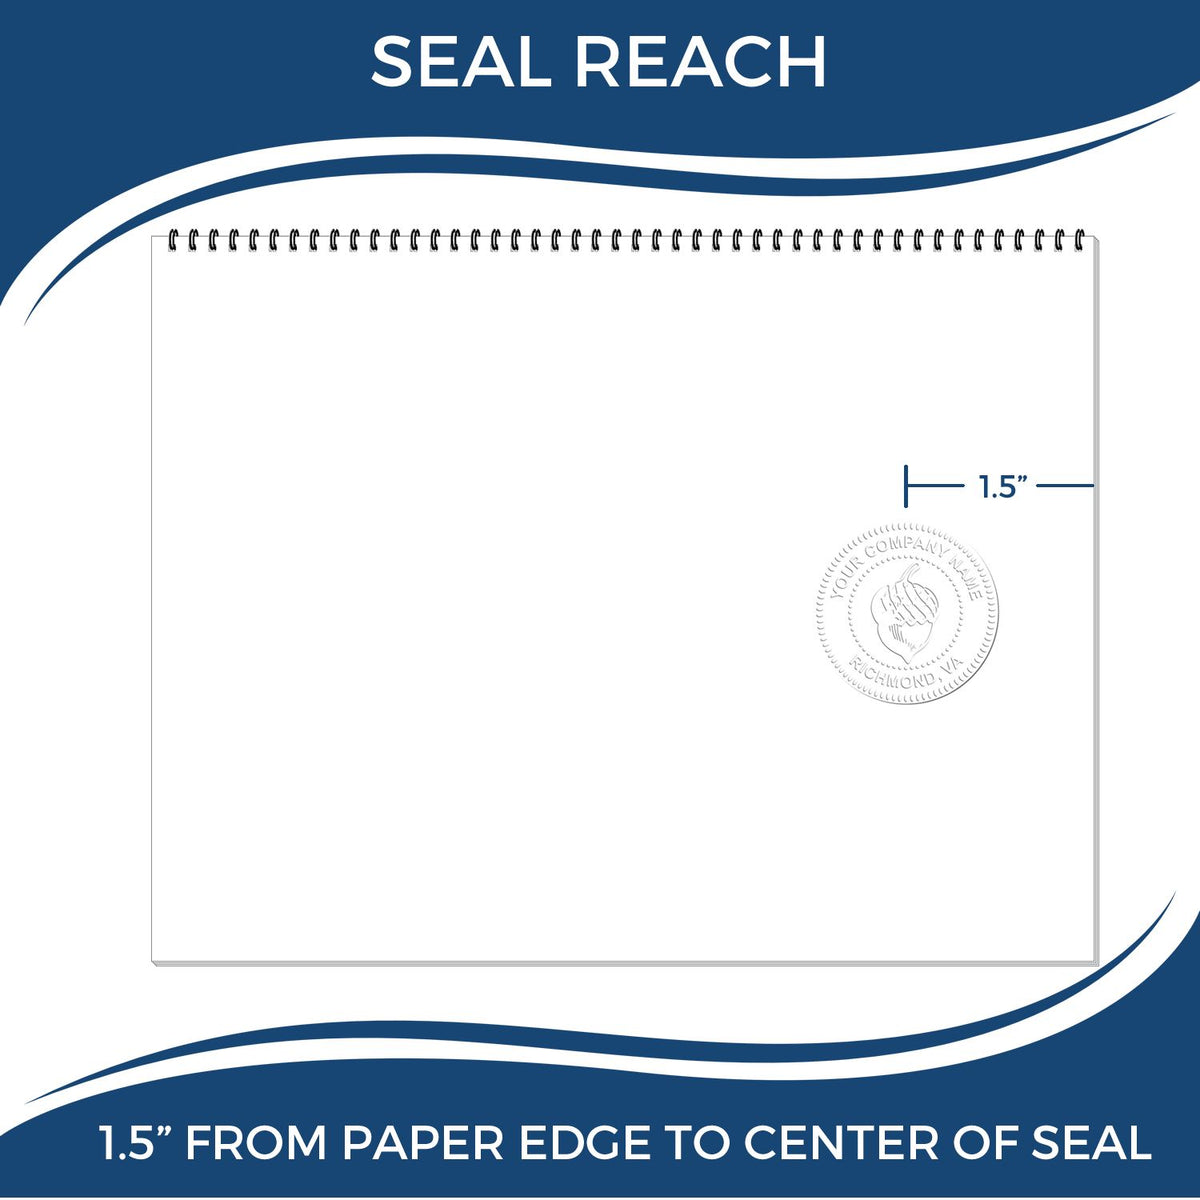 An infographic showing the seal reach which is represented by a ruler and a miniature seal image of the Handheld West Virginia Professional Geologist Embosser